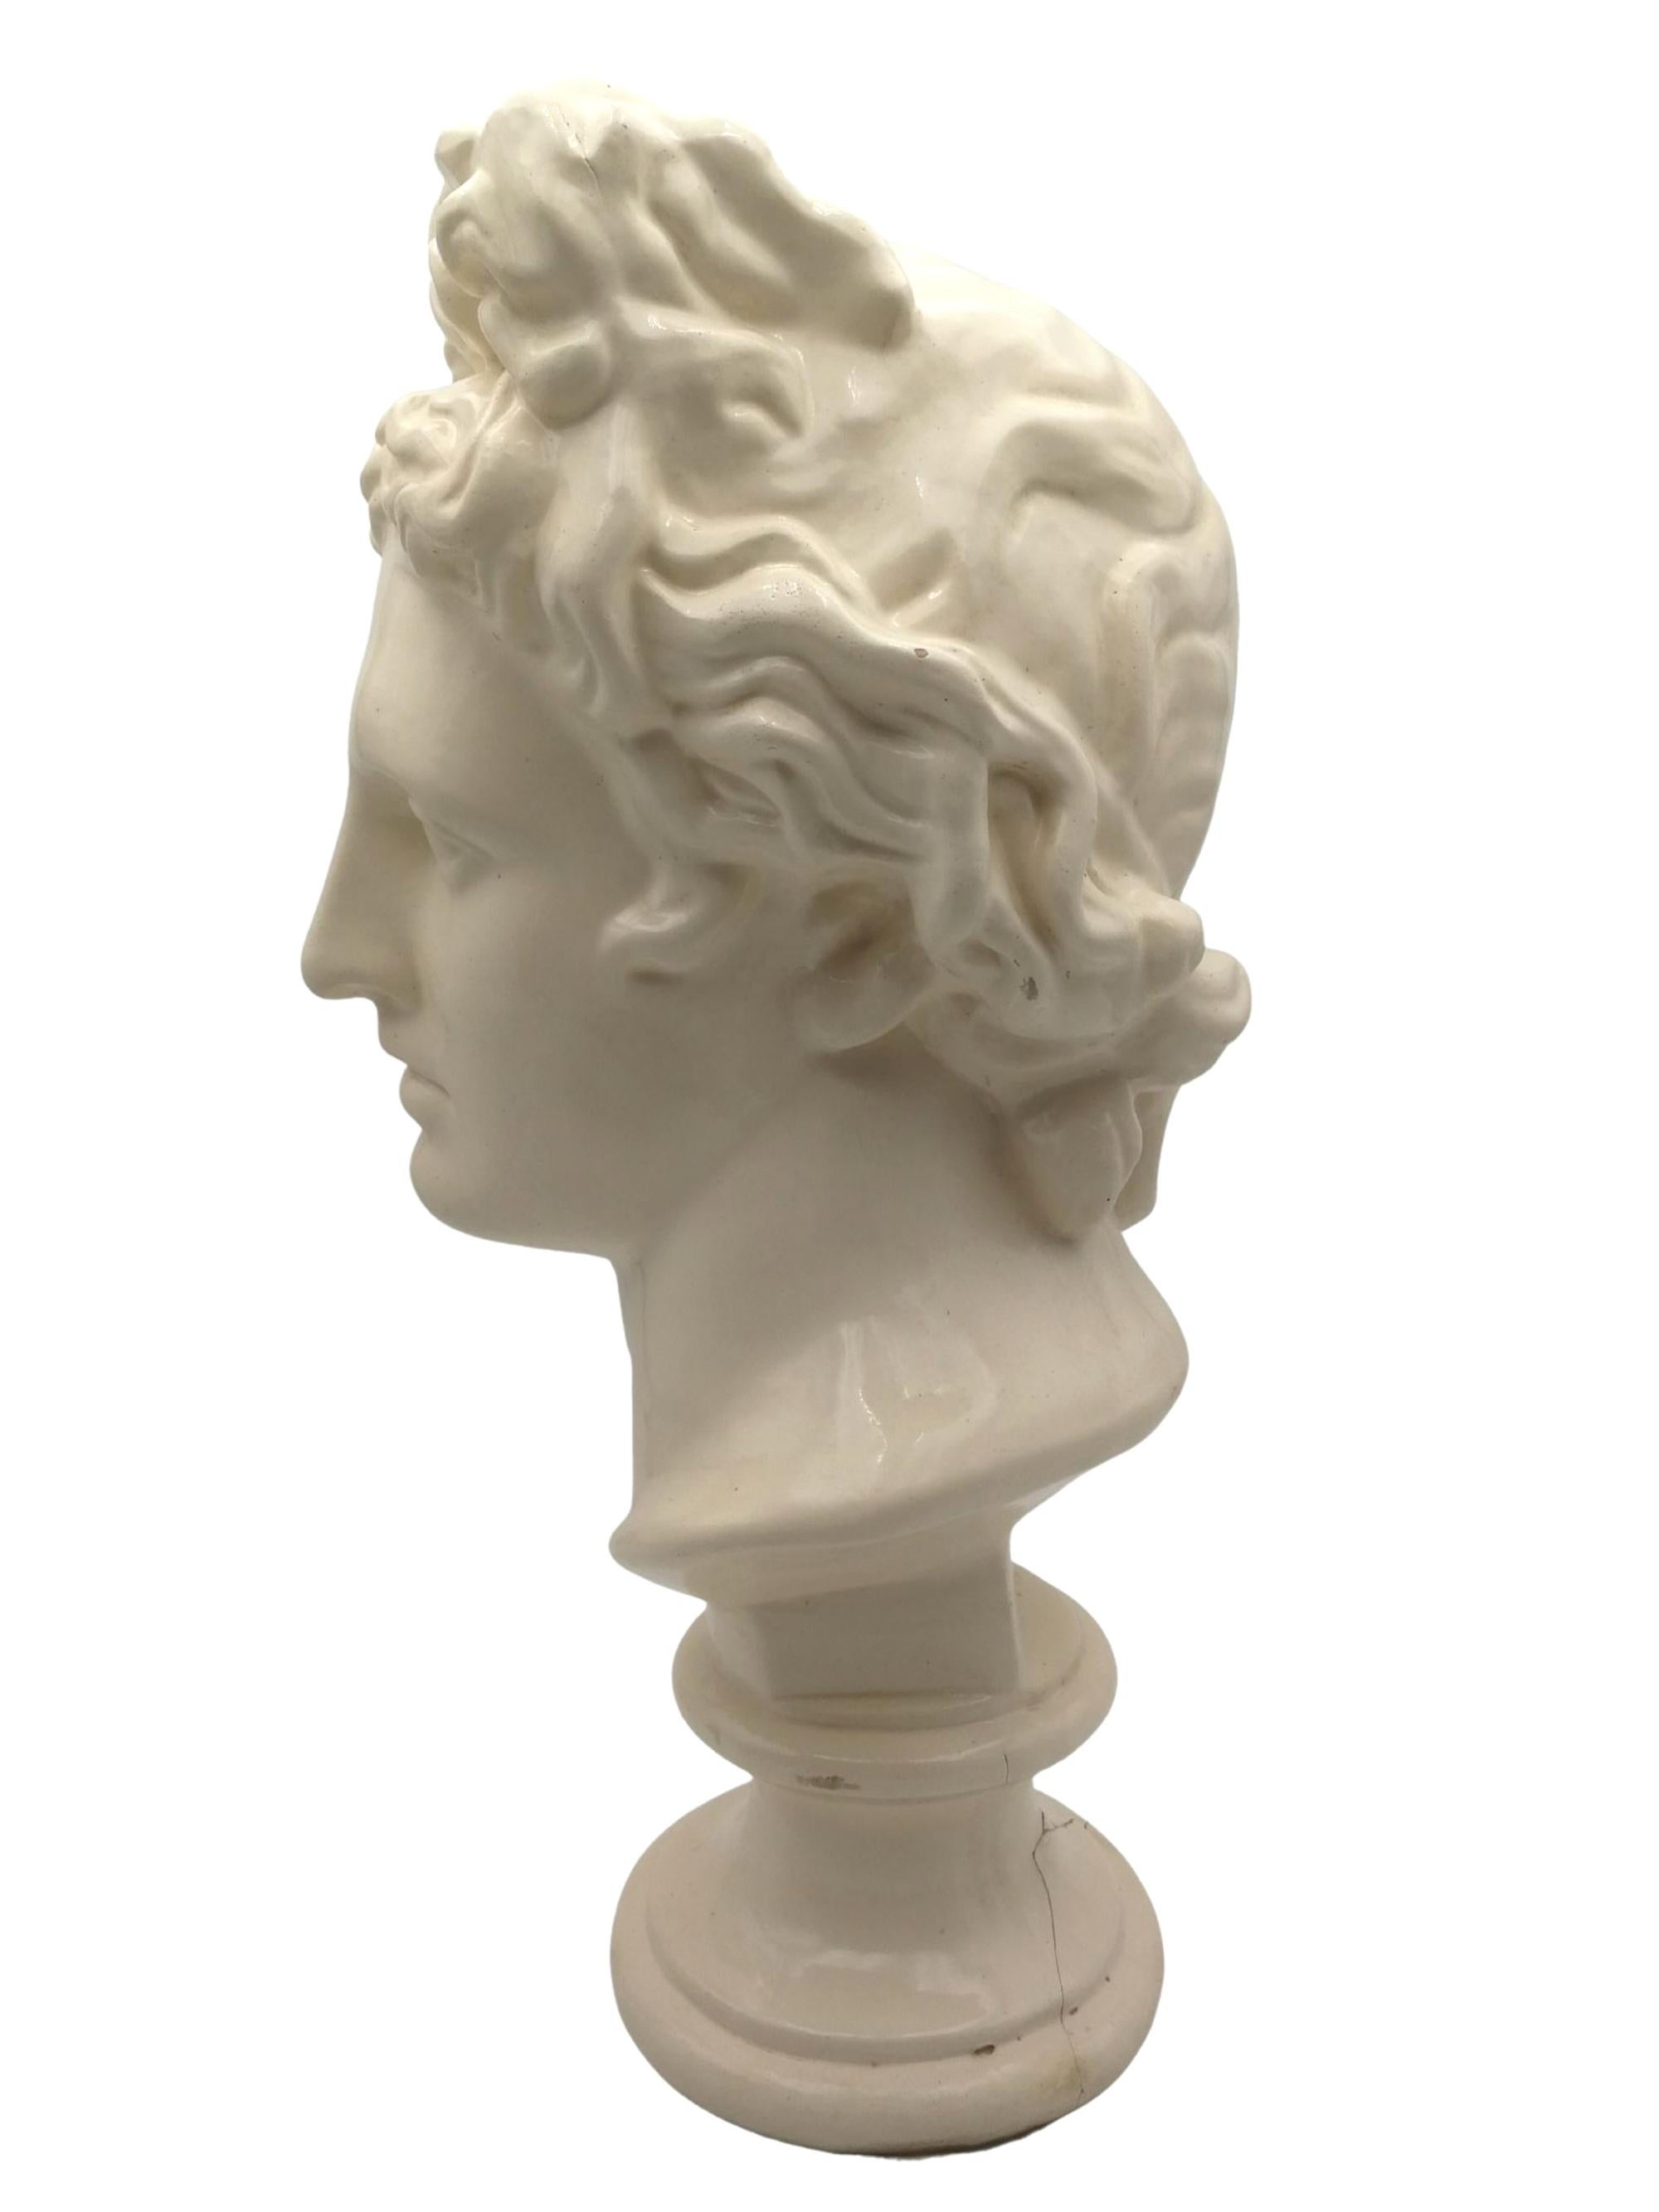 Beautiful glazed terracotta bust of Apollon. This beautiful and elegant off-white bust made in Spain around the 50’s will be a prominent element of your decoration.

